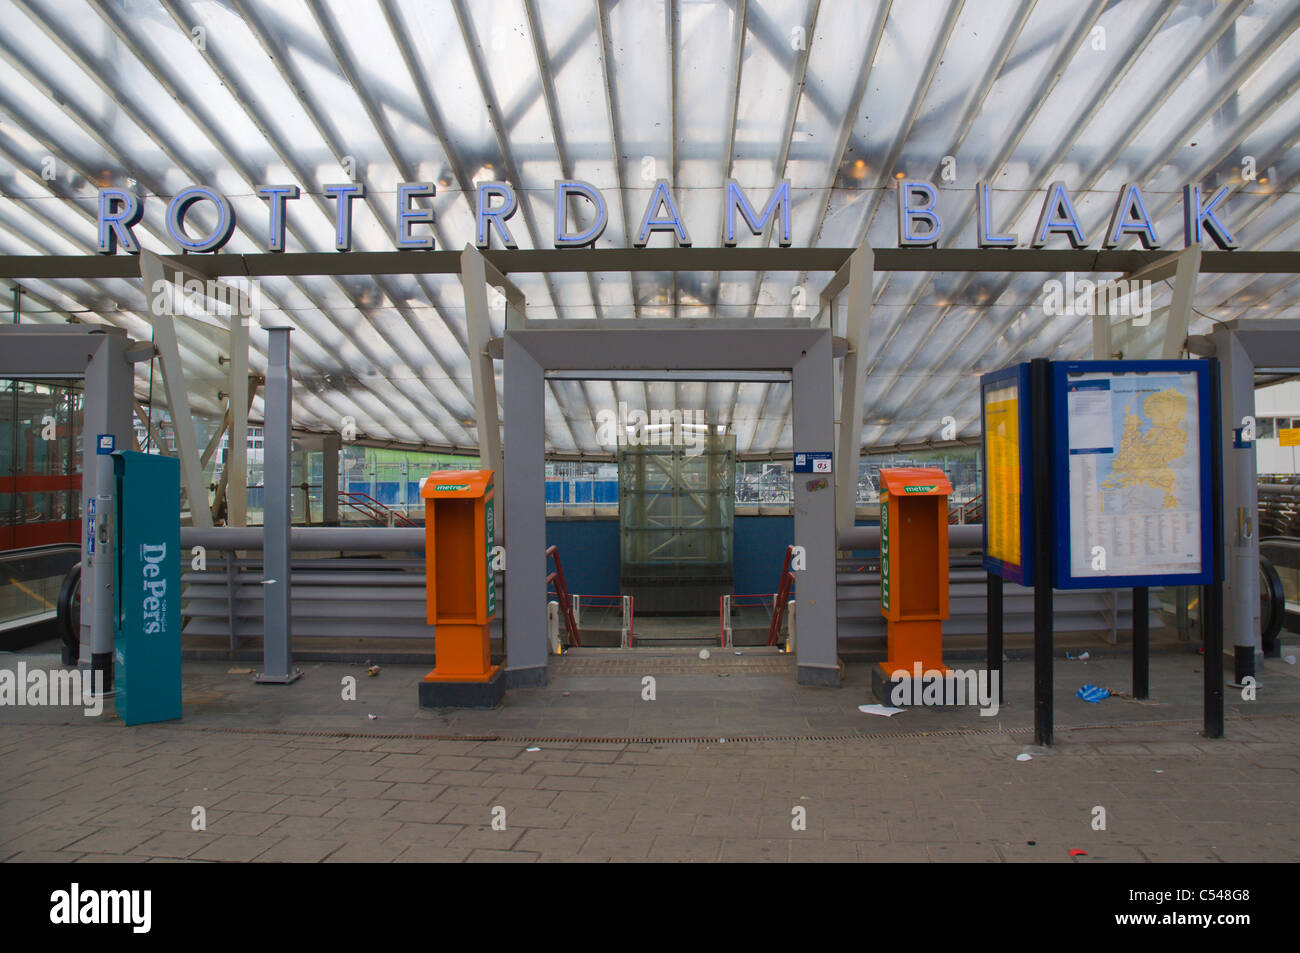 Rotterdam Blaak metro station exterior Rotterdam the province of South Holland the Netherlands Europe Stock Photo